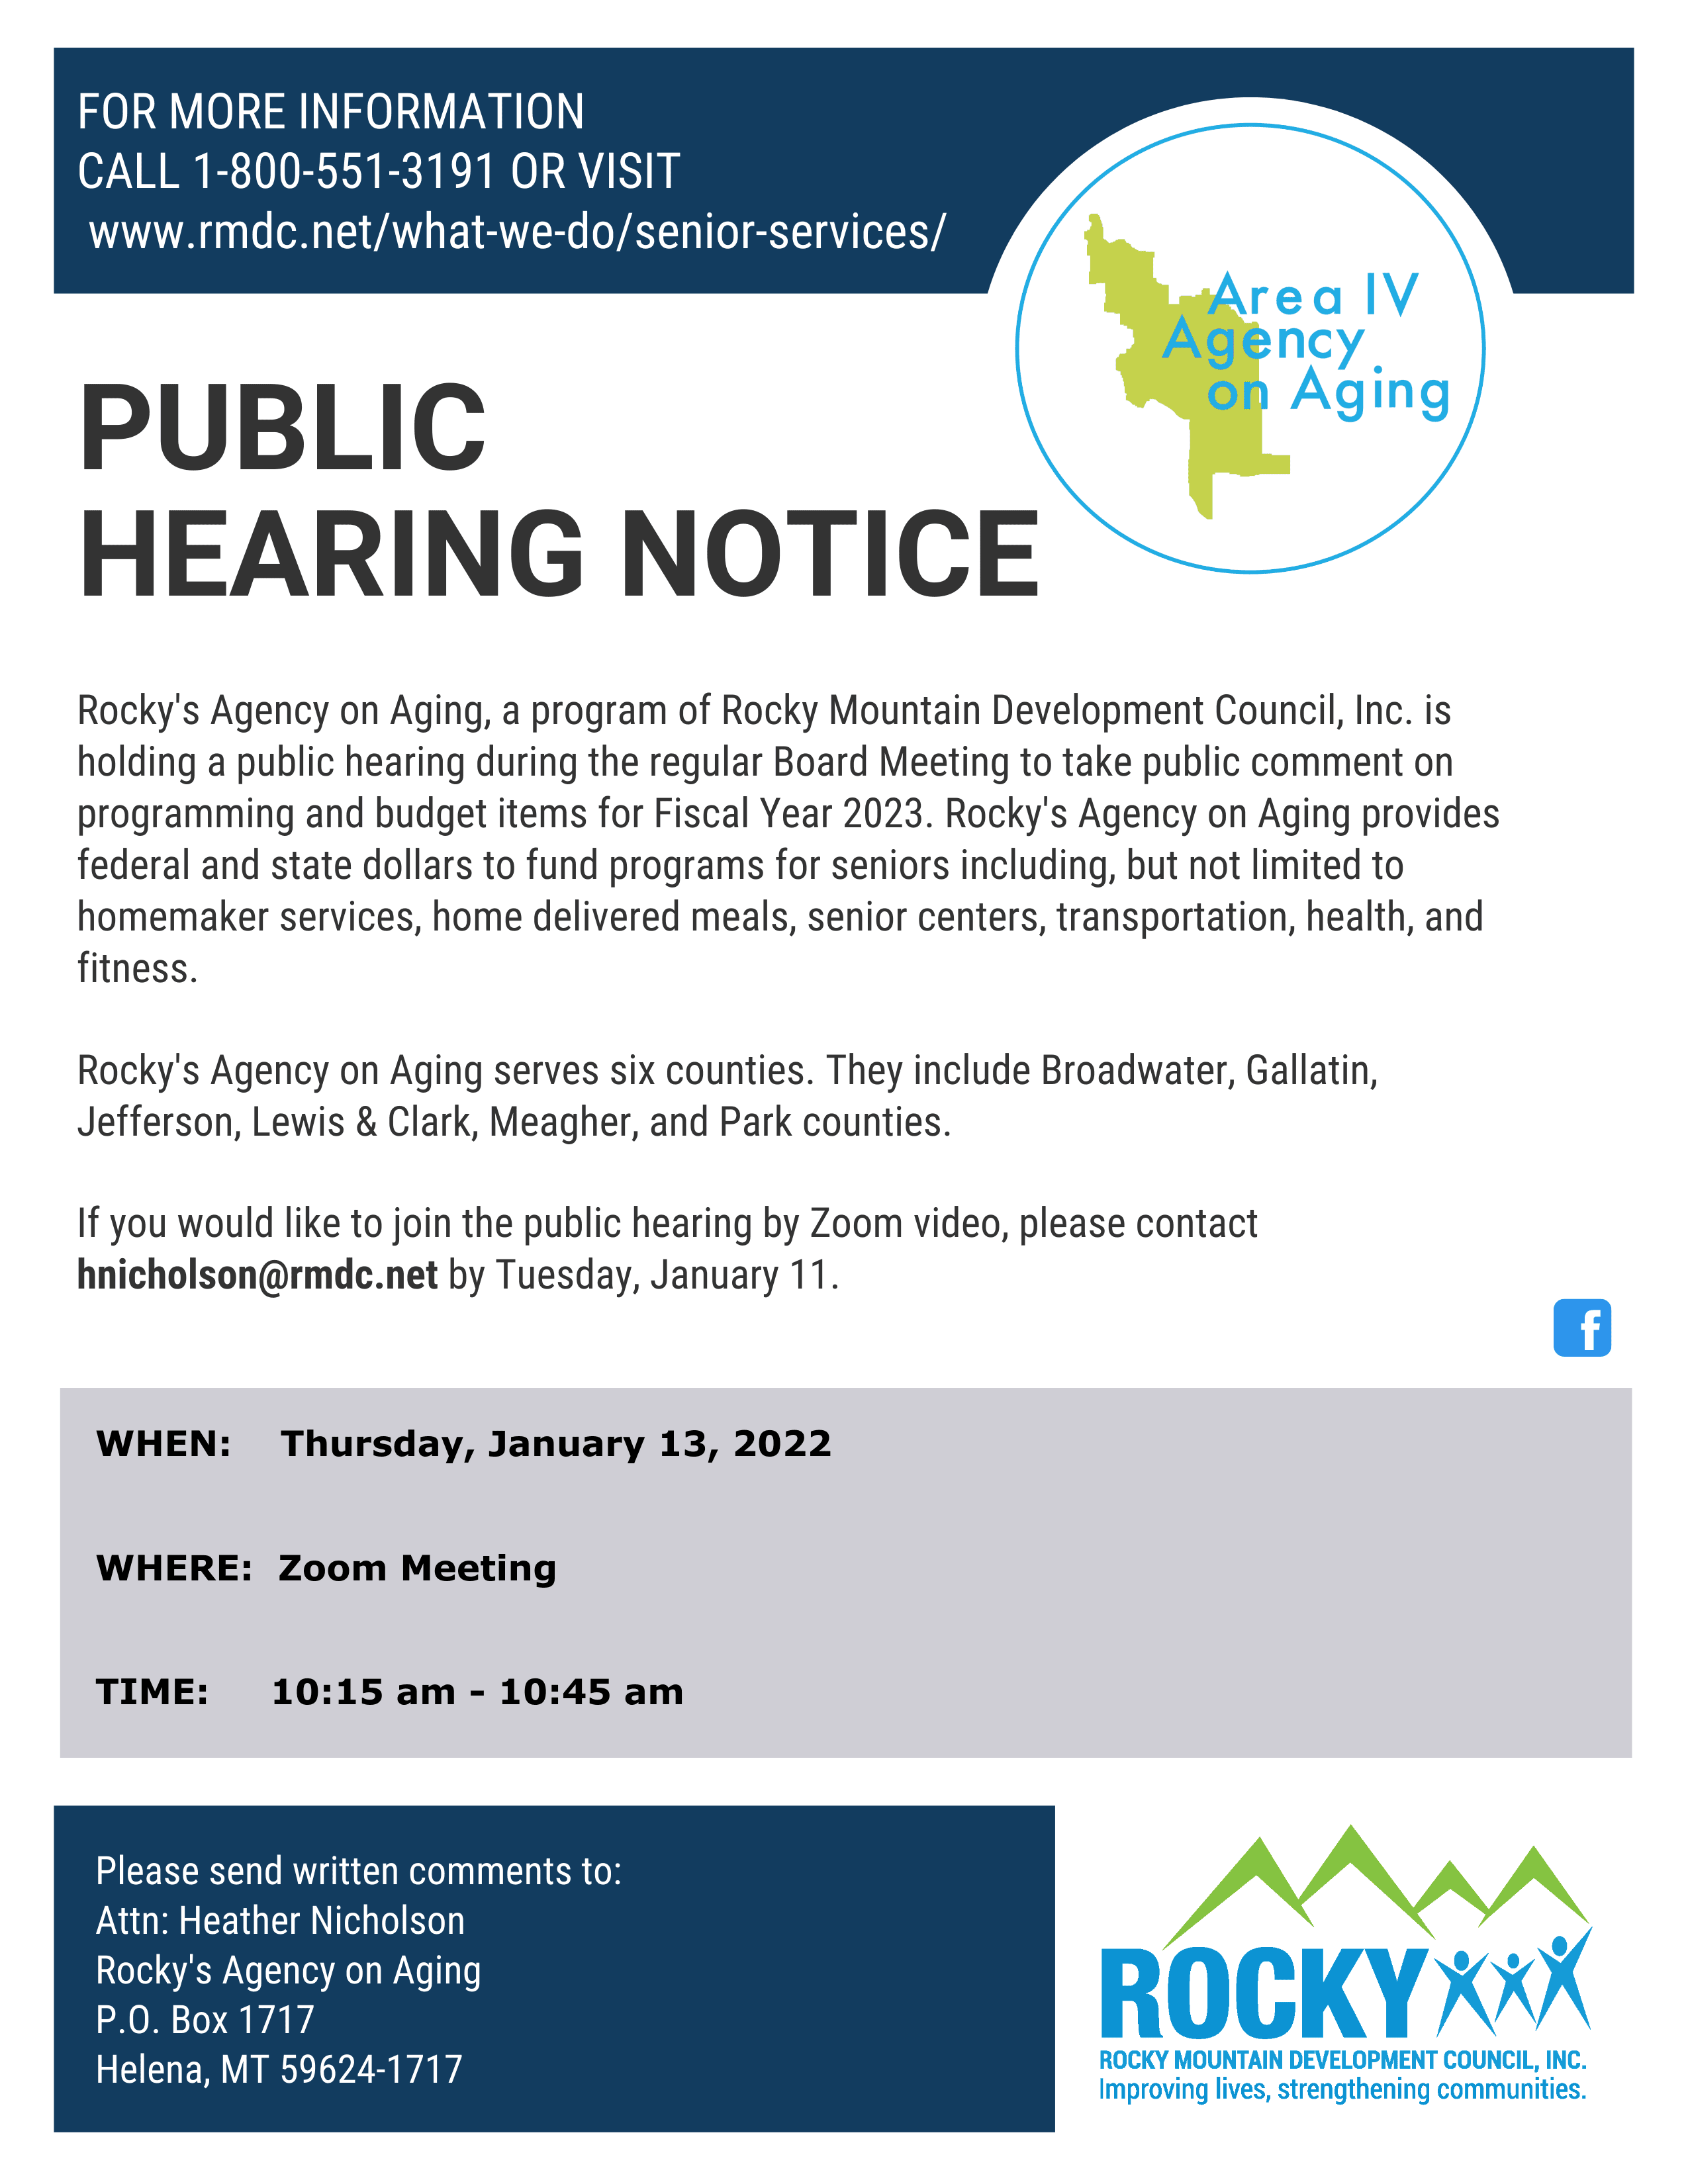 Rocky's Agency on Aging, a program of Rocky Mountain Development Council, Inc. is holding a public hearing during the regular Board Meeting to take public comment on programming and budget items for Fiscal Year 2023. 